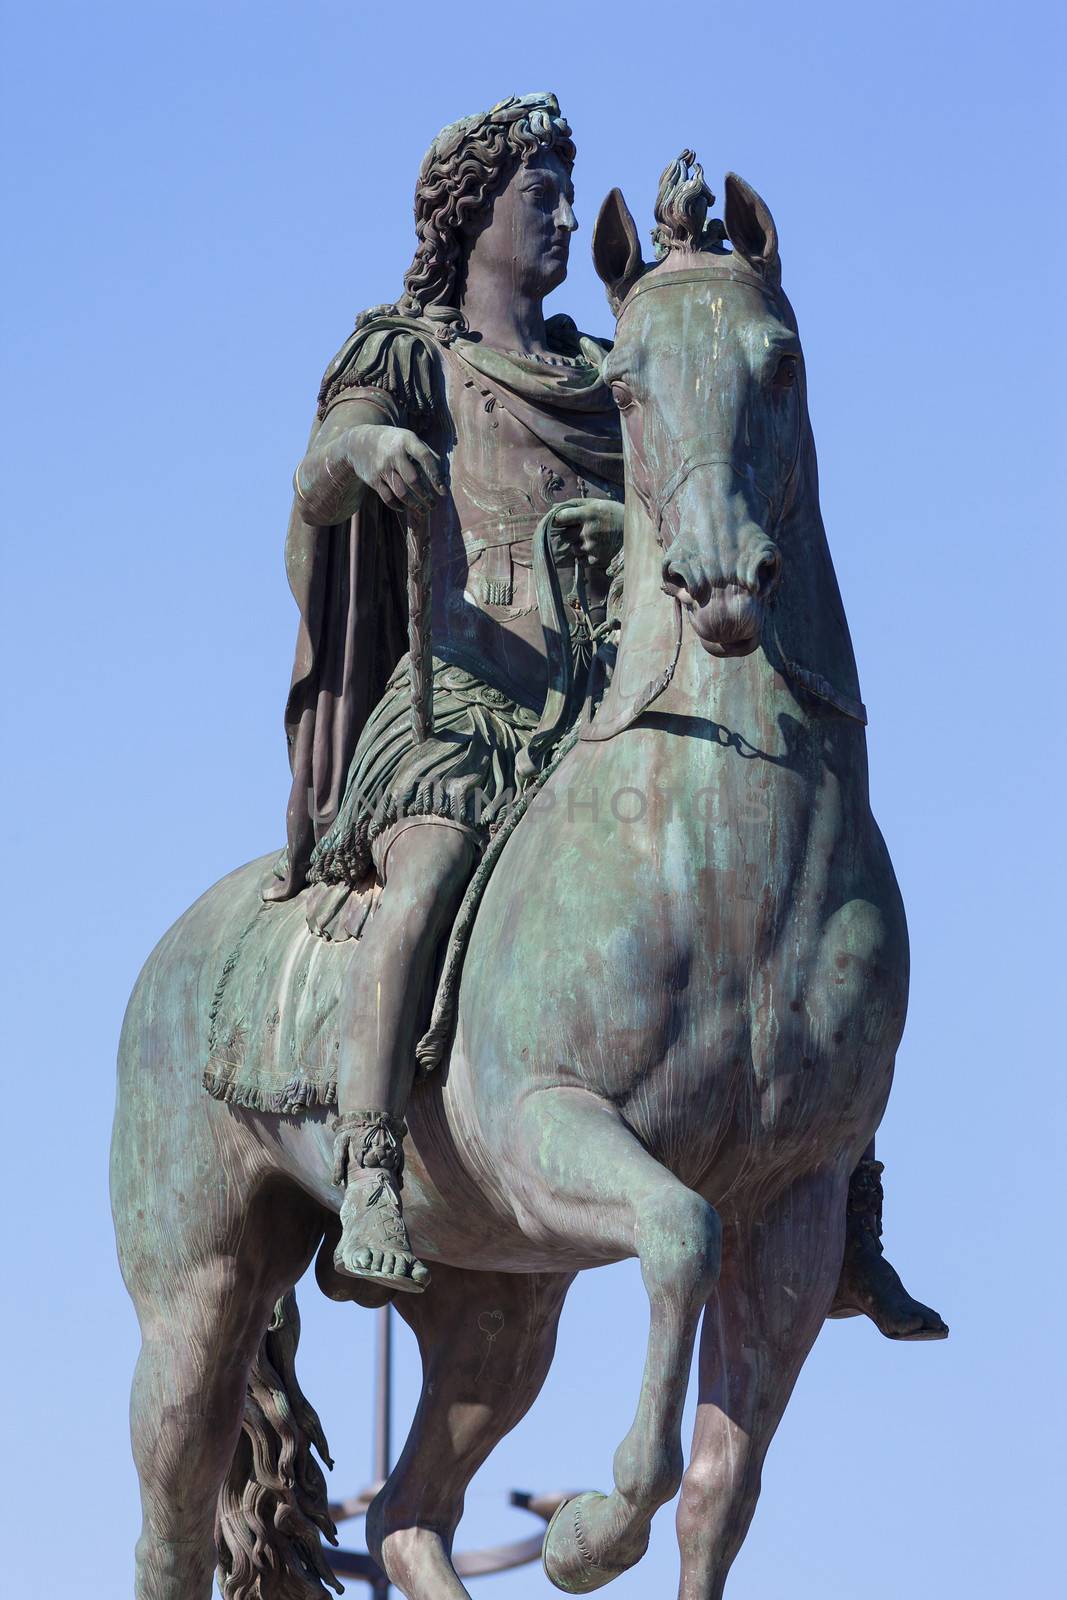 Famous statue of Louis XIV in Lyon by vwalakte